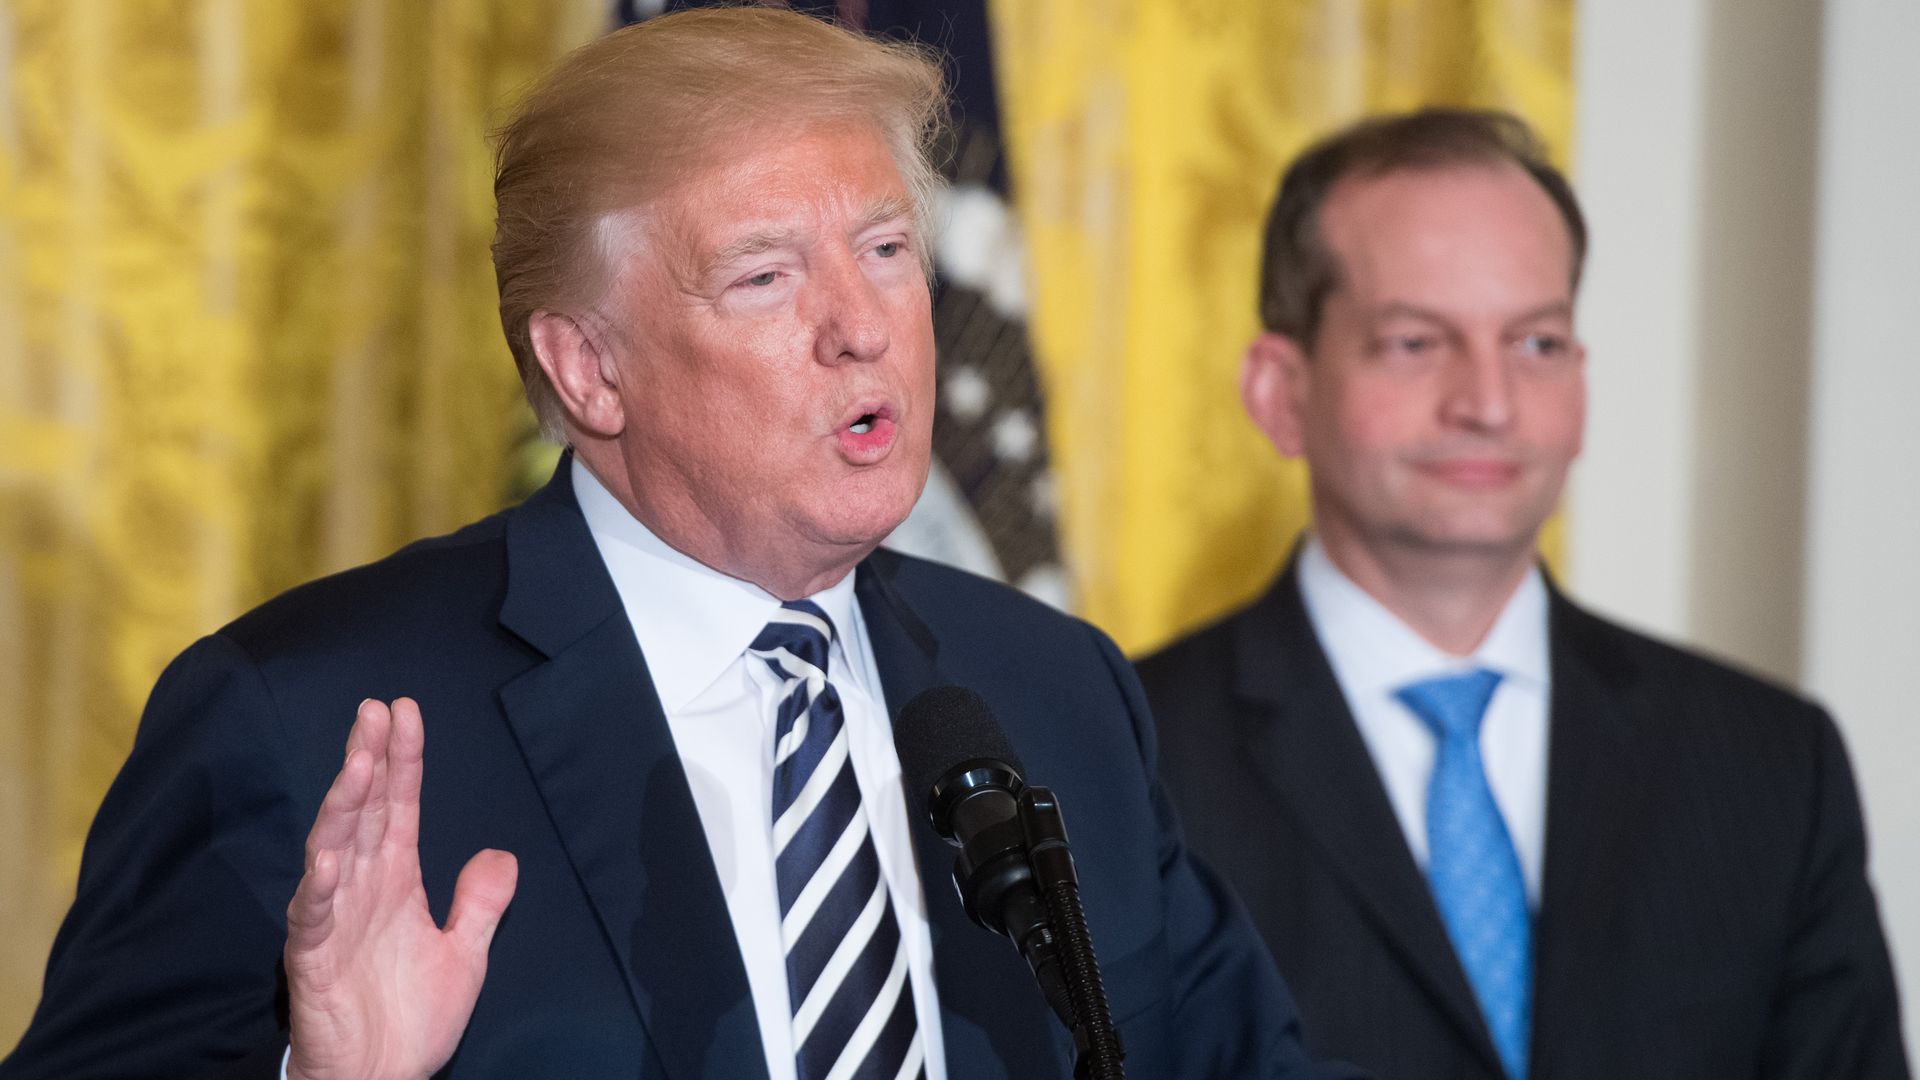 US President Donald Trump speaks alongside Secretary of Labor Alexander Acosta (R) during the National Teacher of the Year reception in the East Room of the White House in Washington, DC, May 2, 2018.